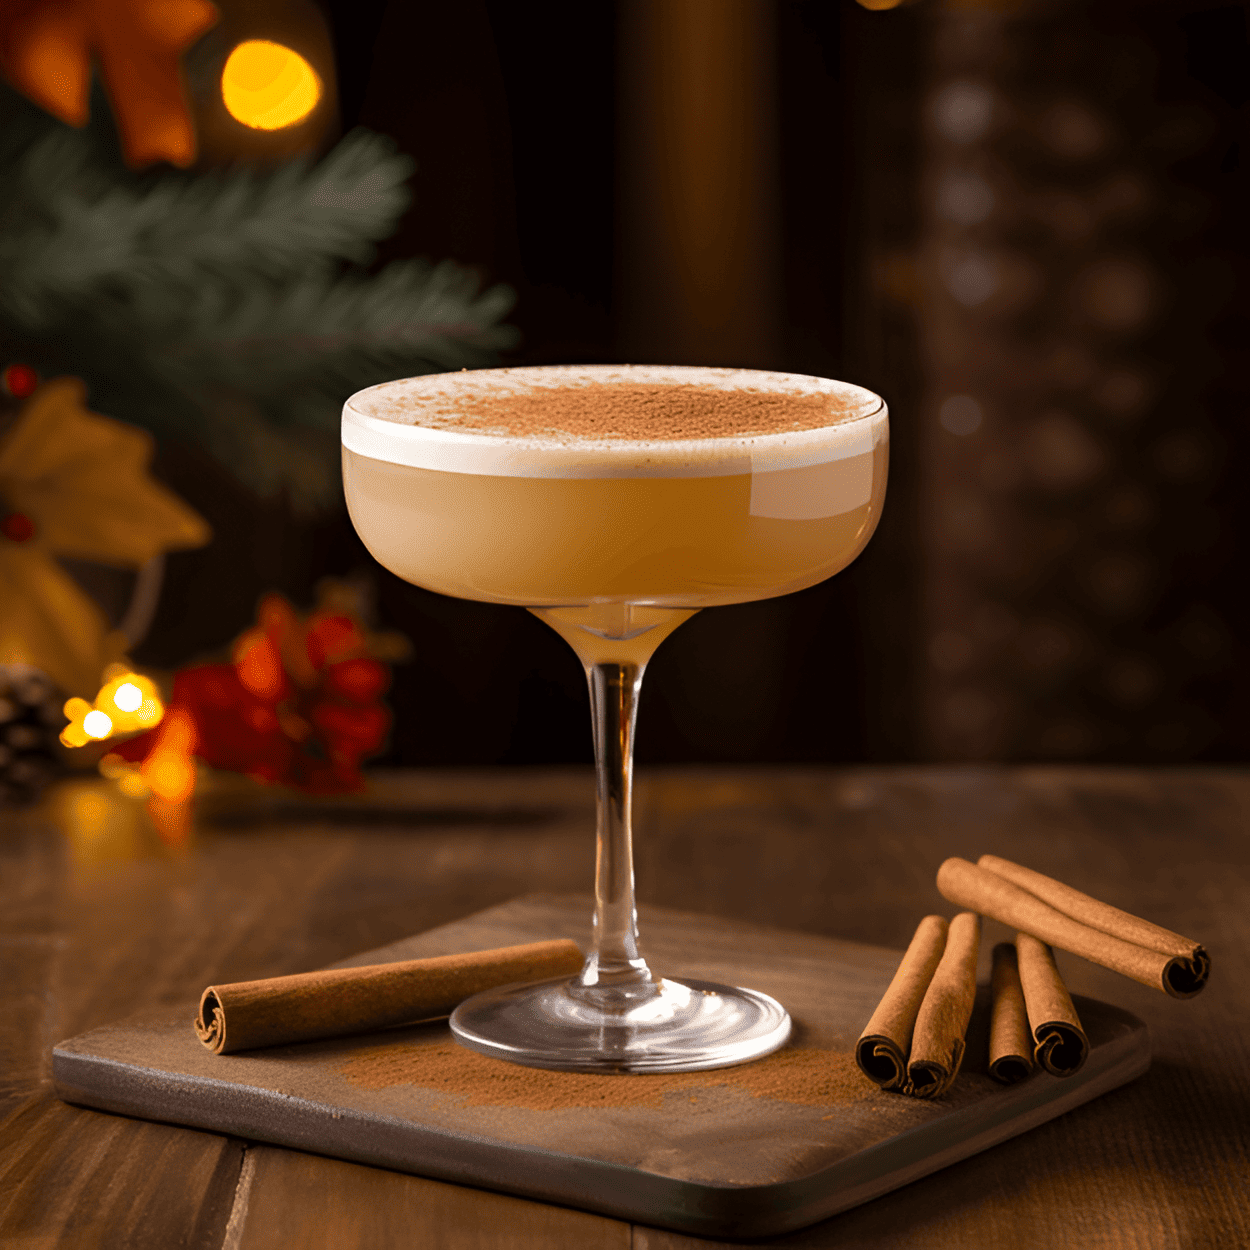 Carrot Cake Cocktail Recipe - This cocktail is sweet, creamy, and rich, with a hint of spice from the cinnamon. It has a unique flavor profile that truly mimics the taste of a carrot cake.